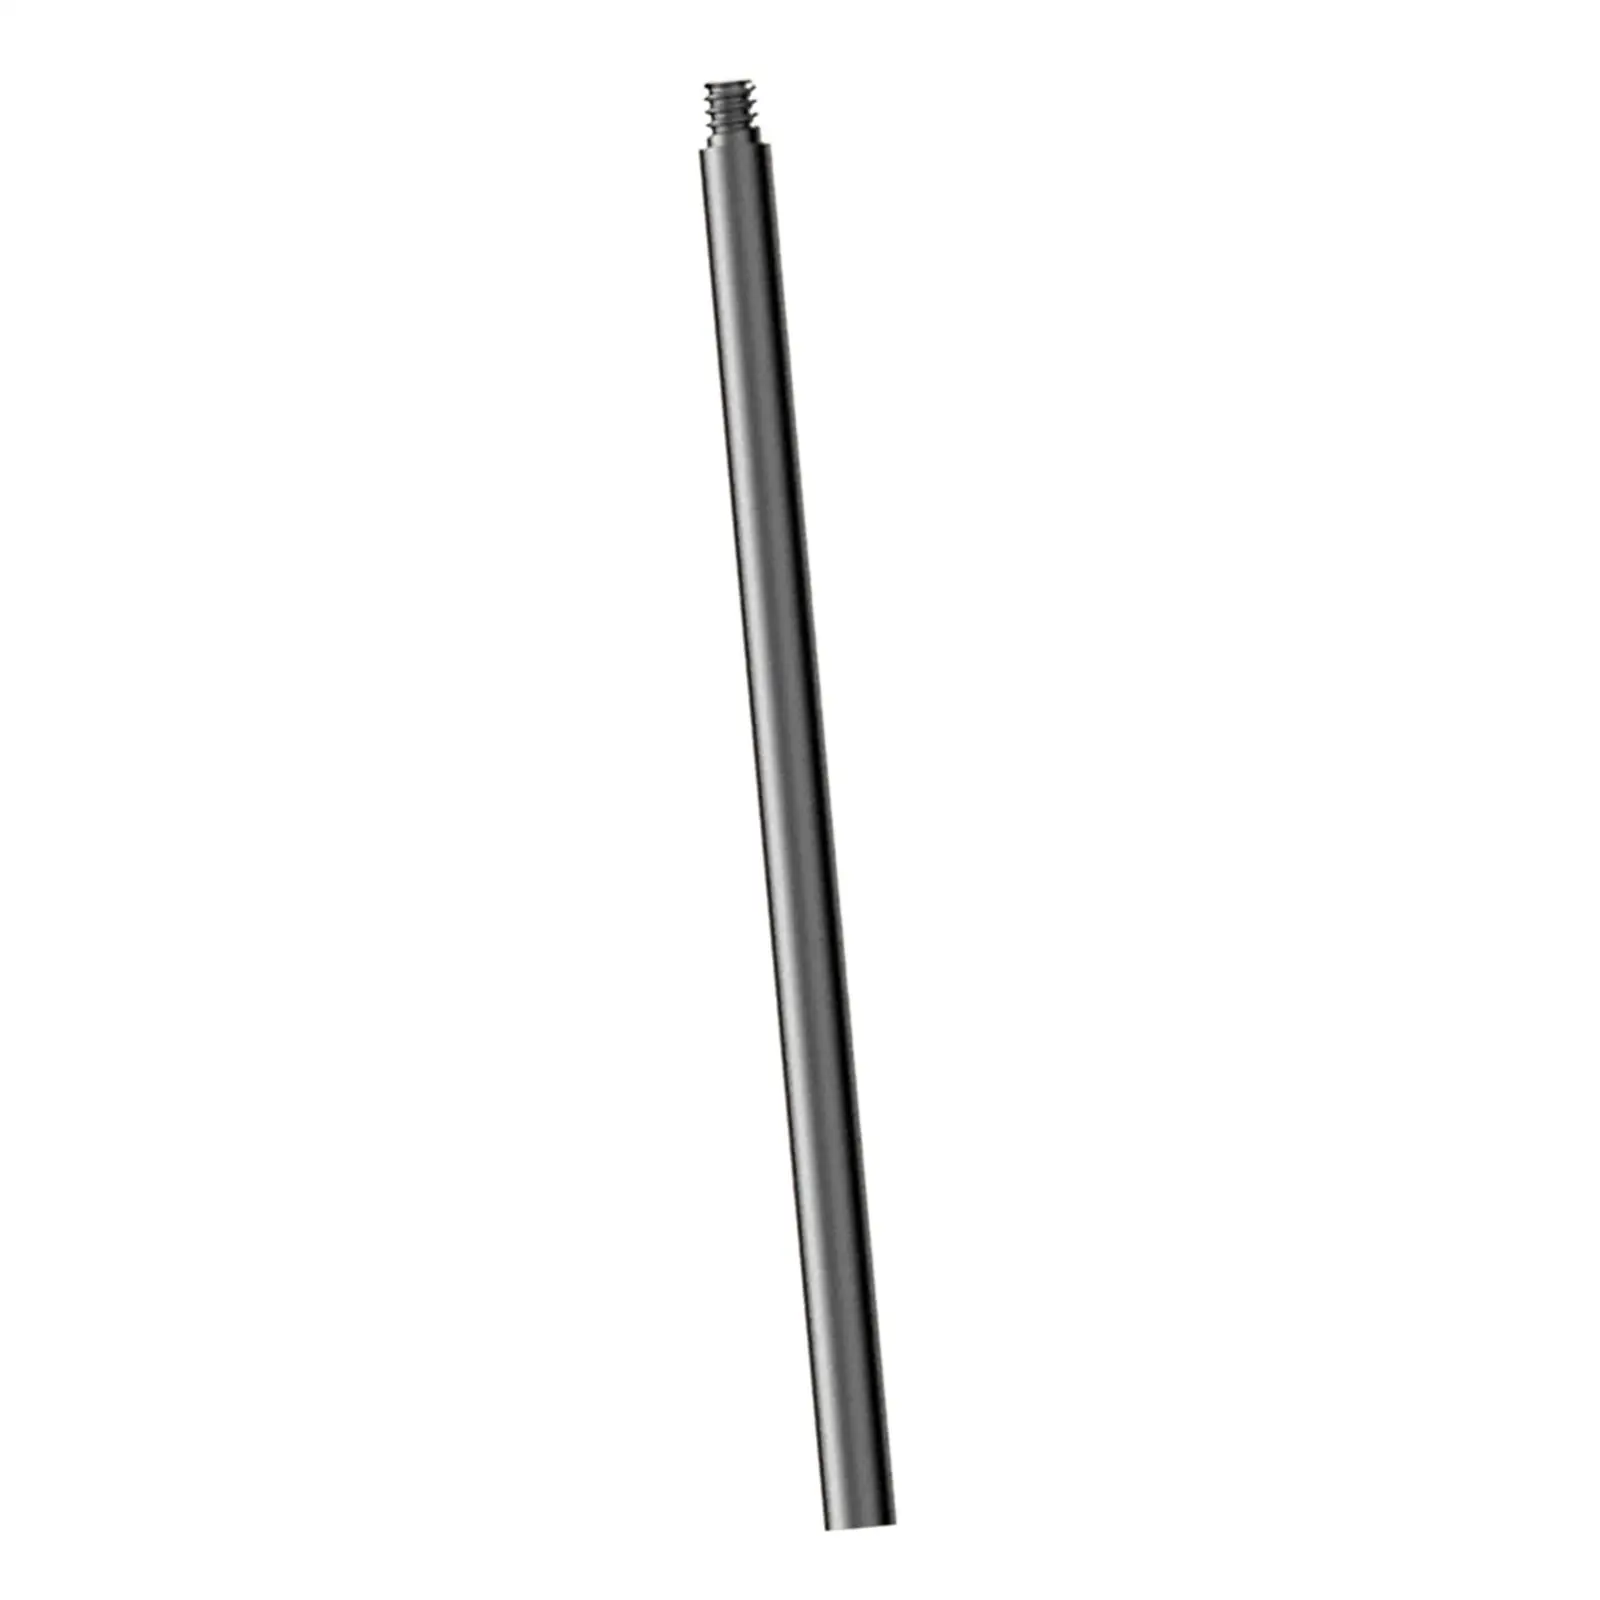 Lantern Stand Extension Rod Durable Extension Pole for Light Support Holder